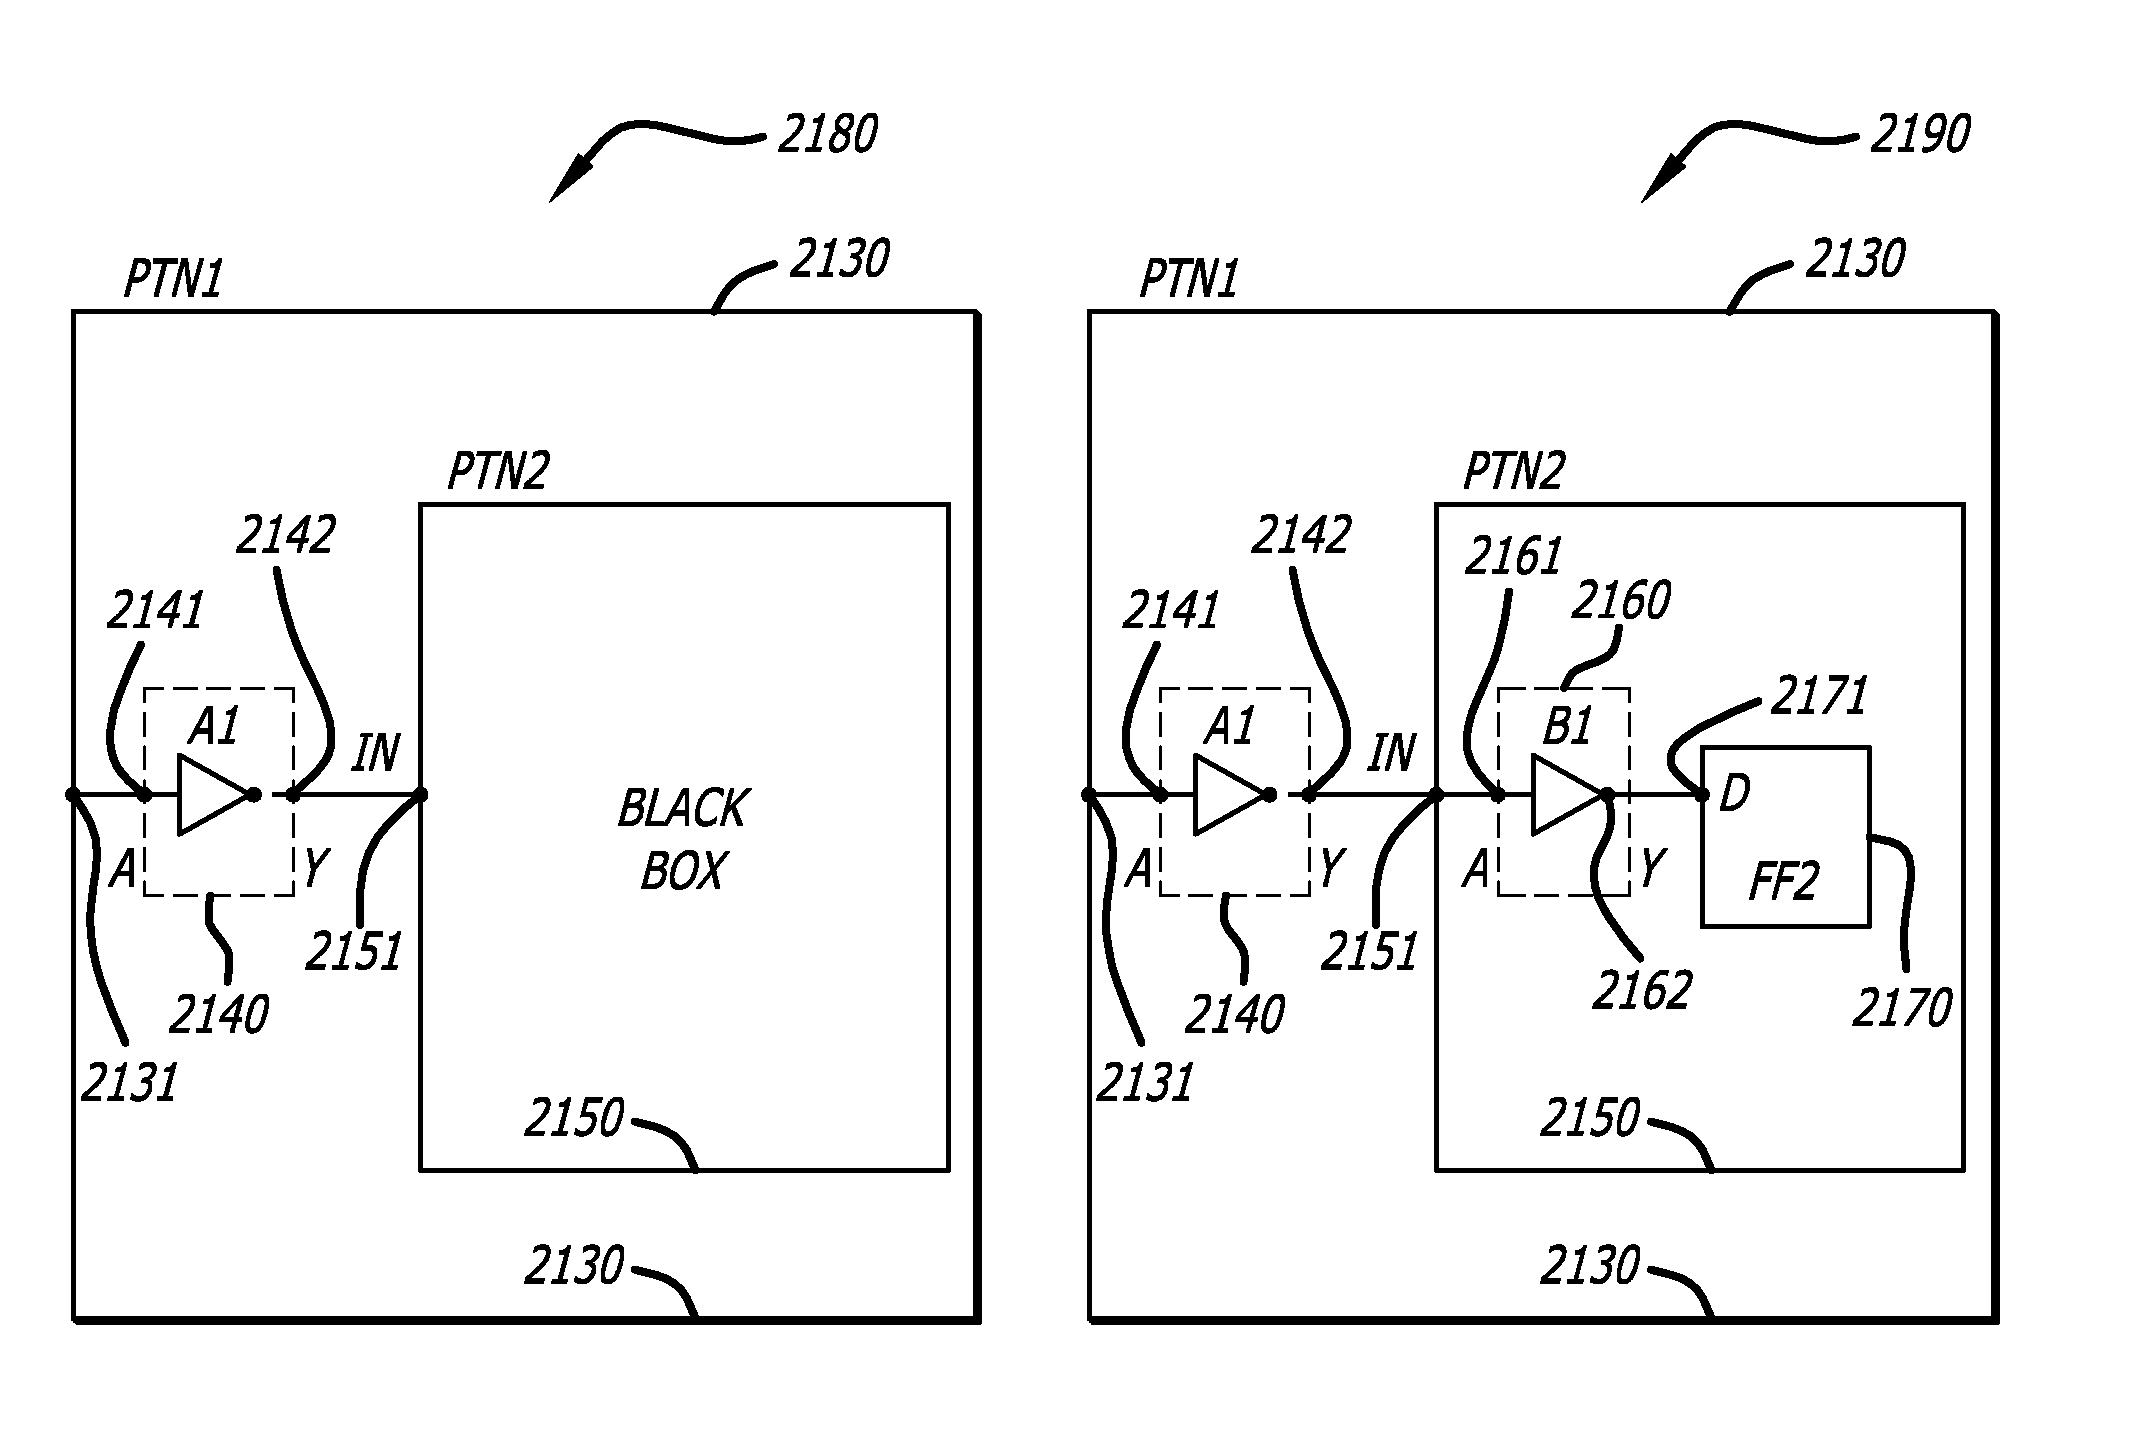 Timing budgeting of nested partitions for hierarchical integrated circuit designs